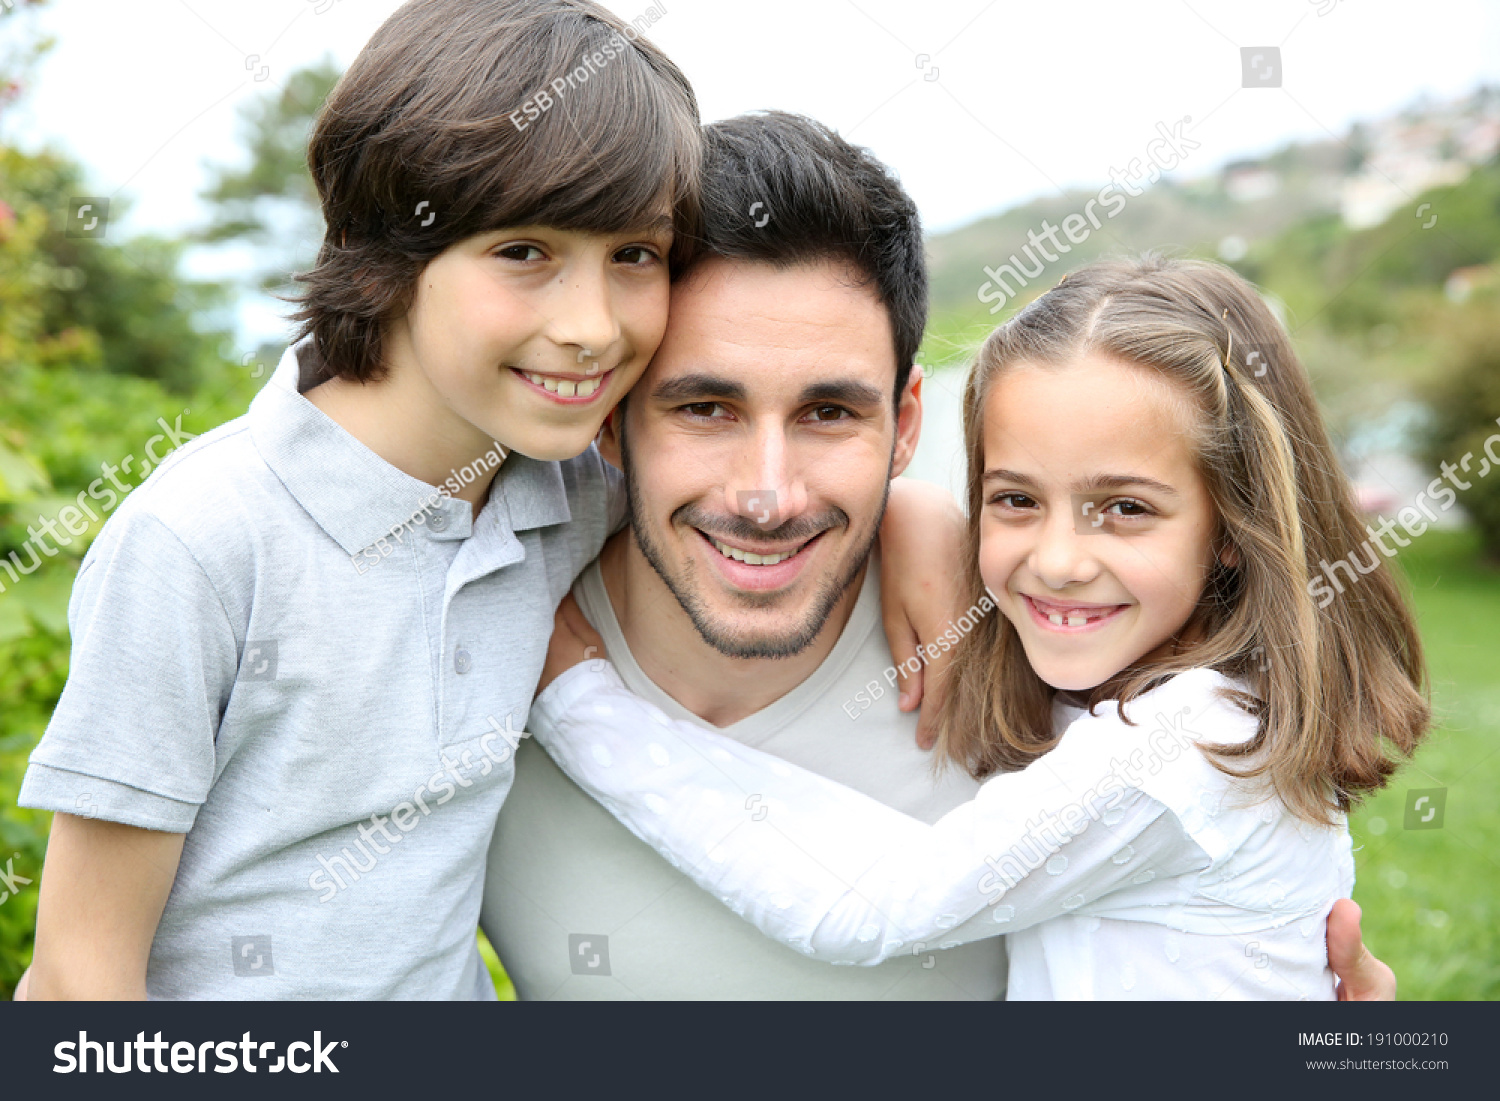 Portrait of young man with 2 kids #191000210